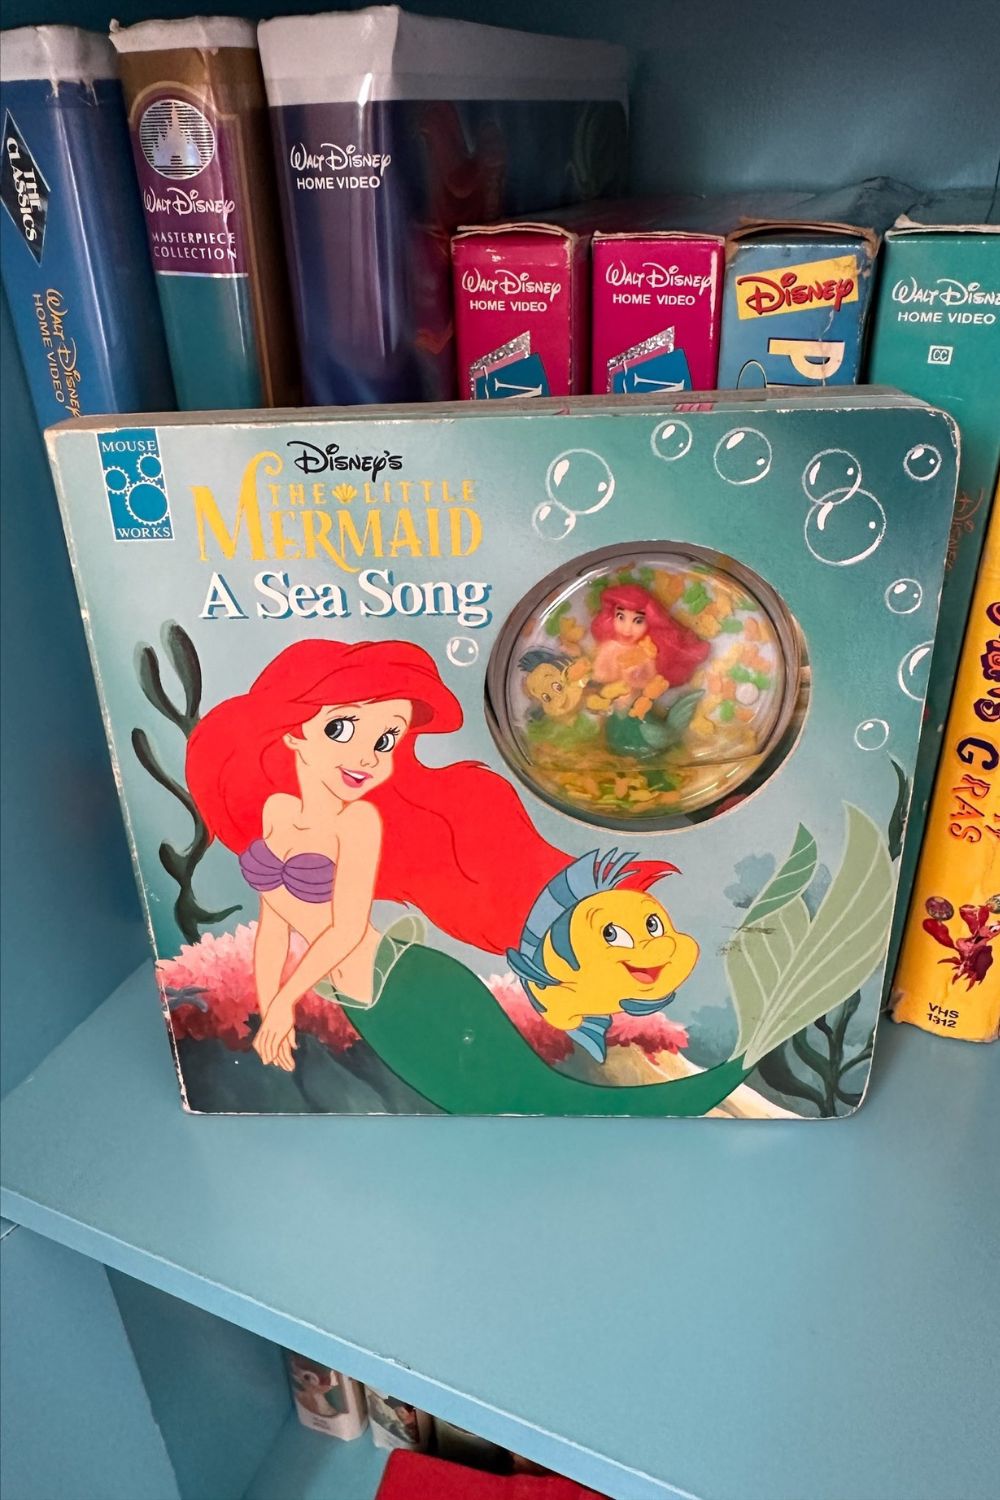 1997 DISNEY'S THE LITTLE MERMAID "A SEA SONG" WITH BUILT-IN SNOW GLOBE BOOK*